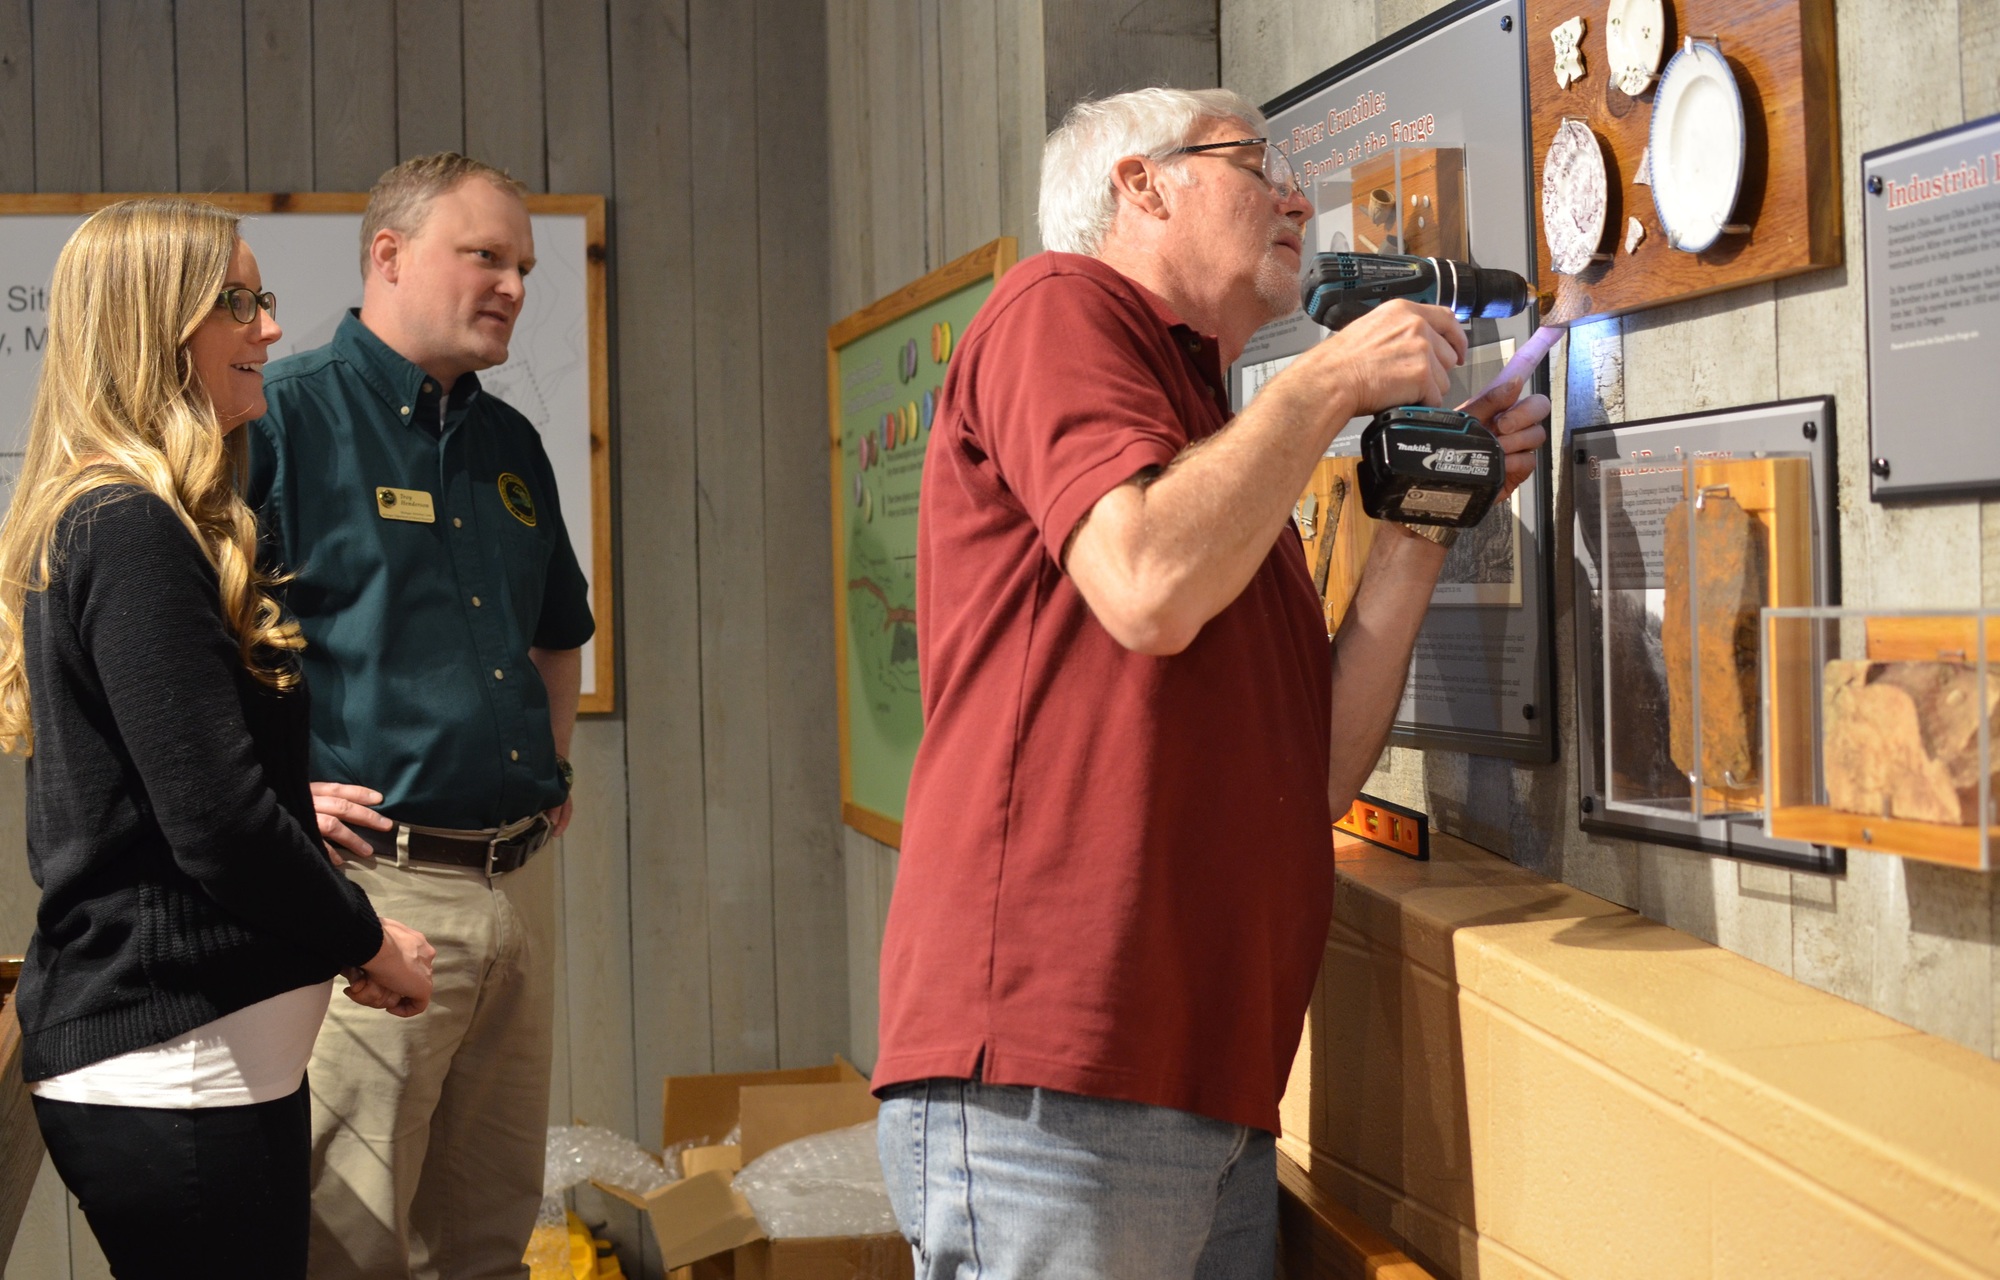 Steven Ostrander, a historian with the Michigan Historical Center, works on installing a display that is part of the Carp River Forge exhibit.